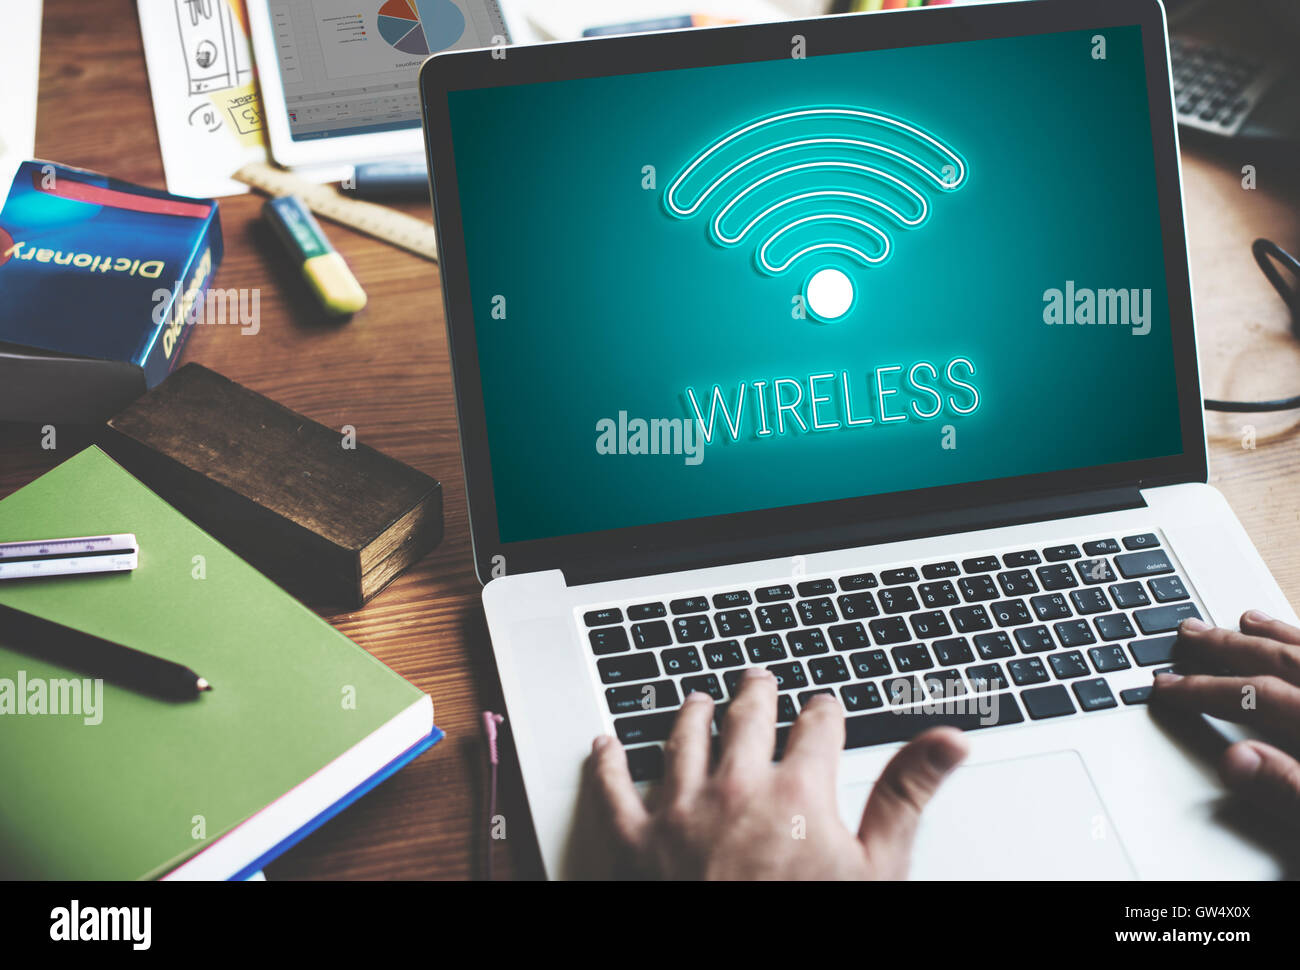 Online Network Wifi COmmunication Icon Concept Stock Photo